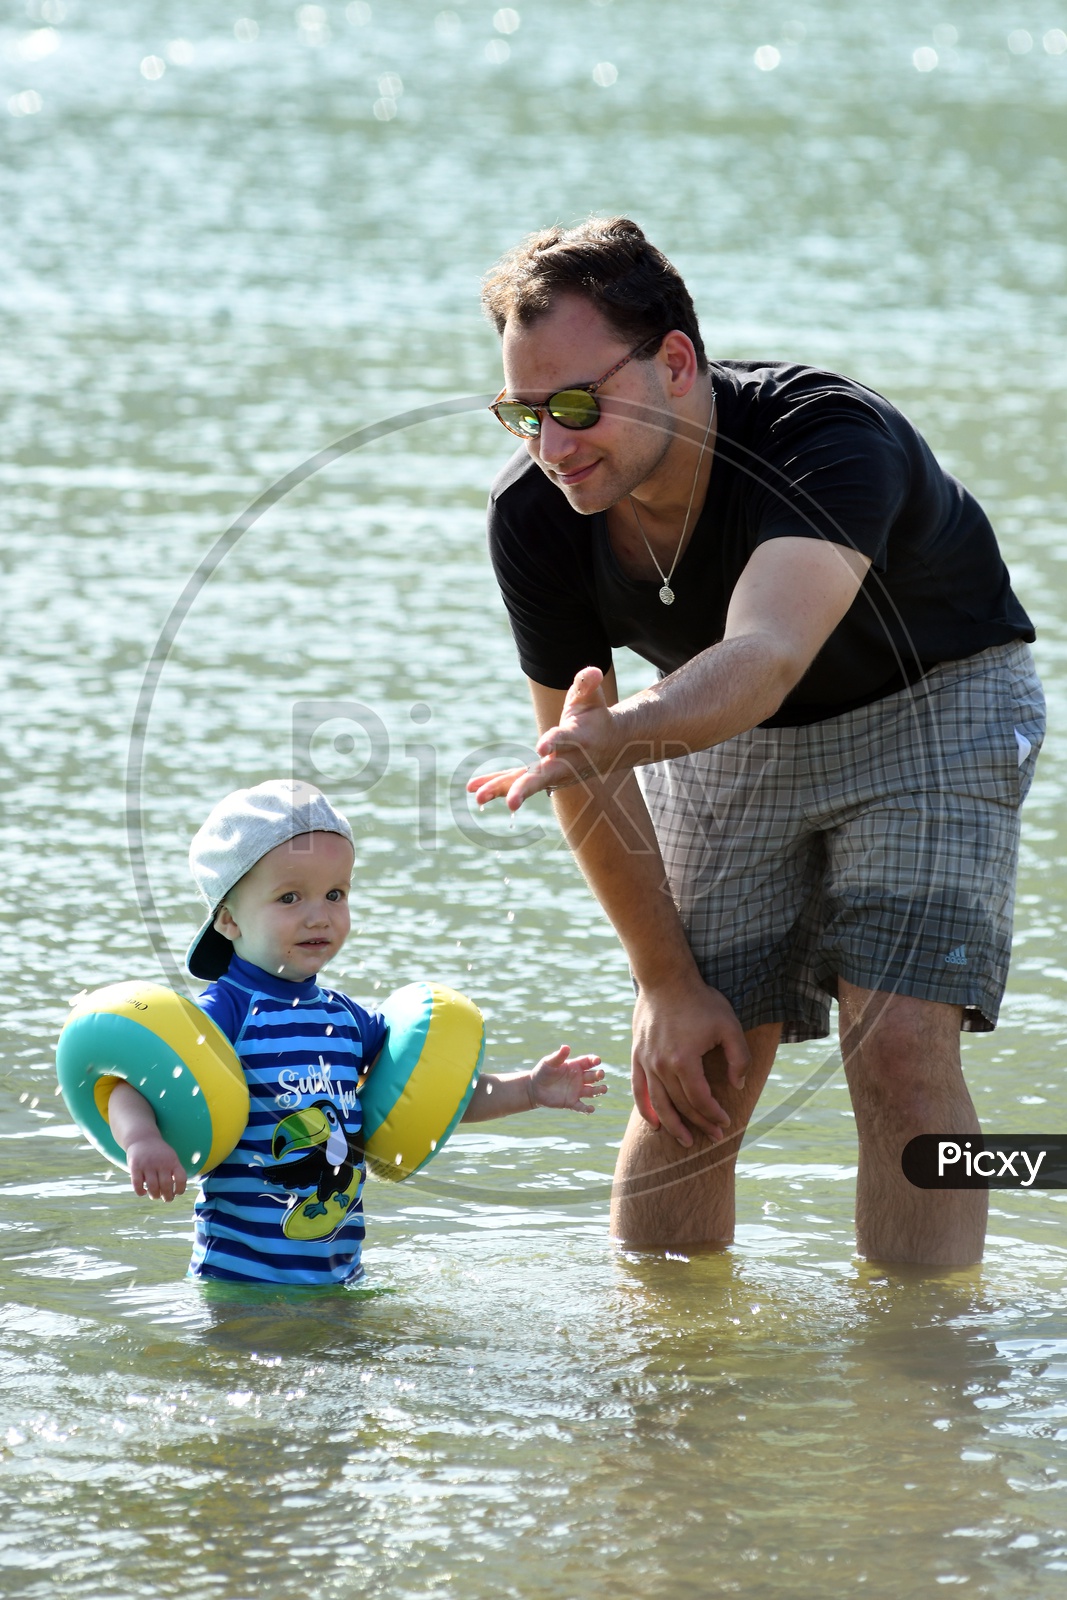 Father With His Son In a Lake Training him in Swimming